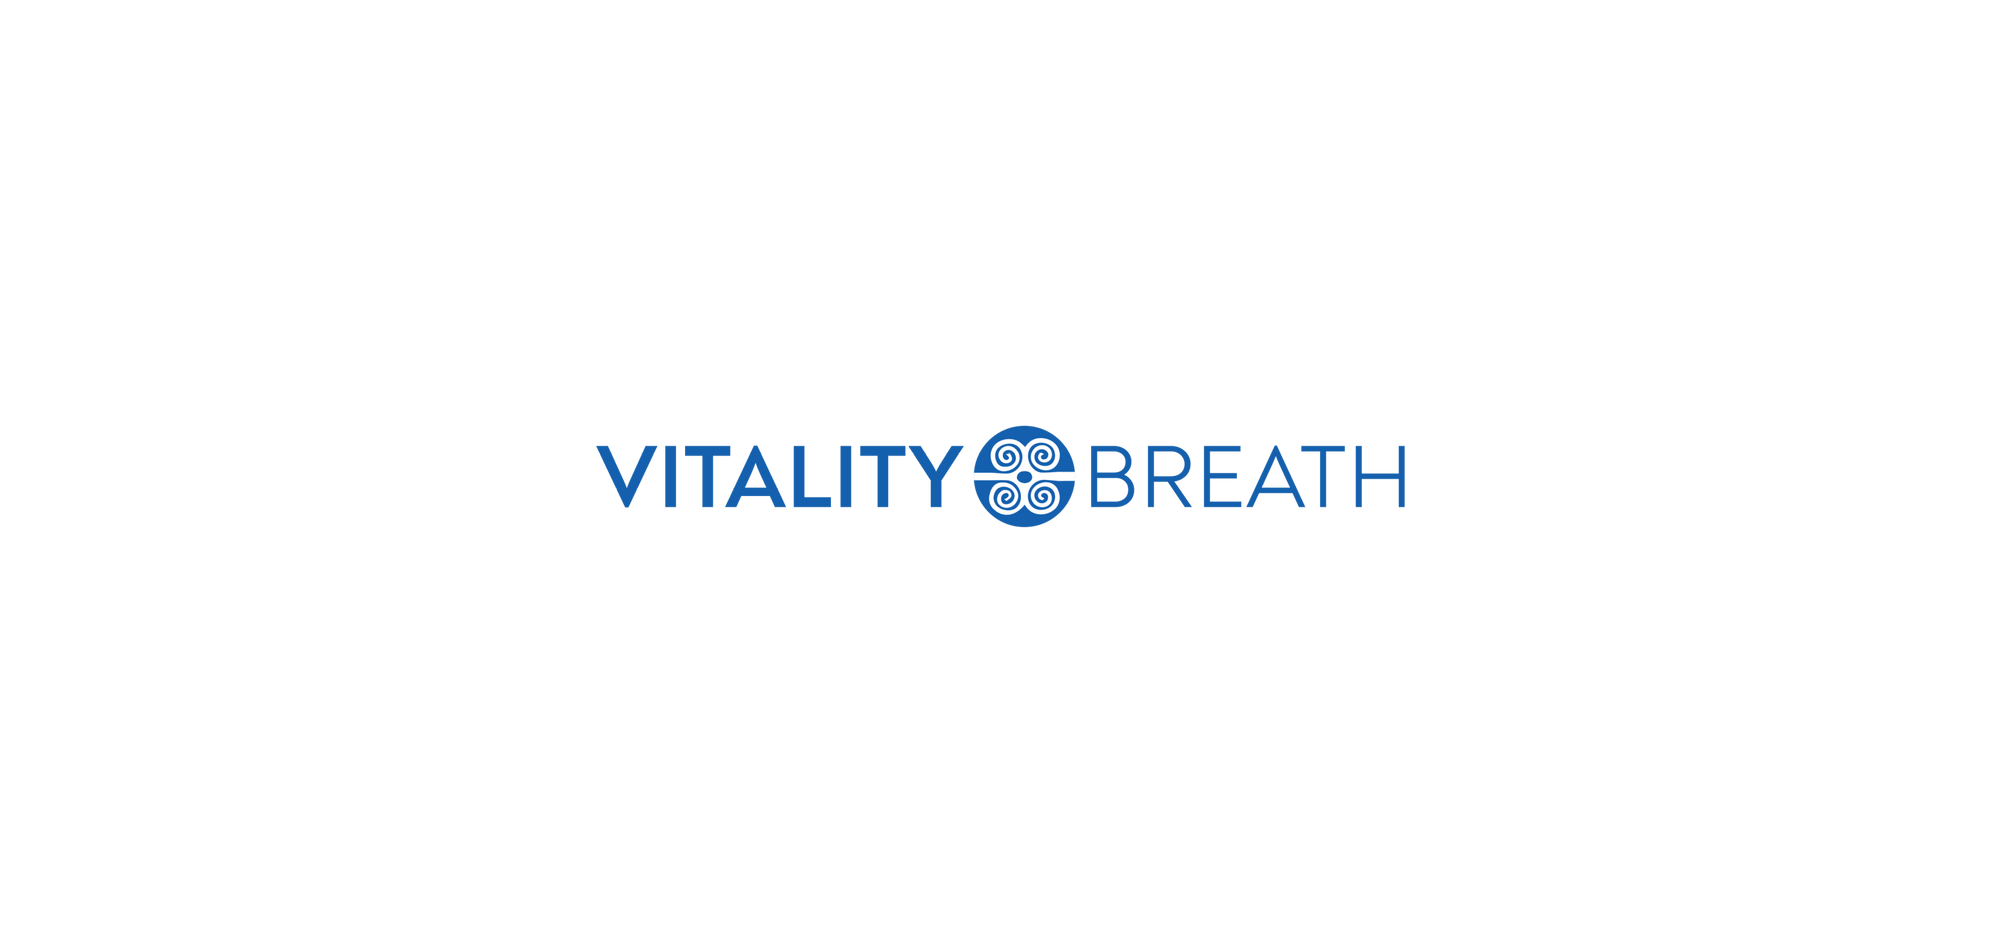 Our Breath is Our Power - Vitality Breath